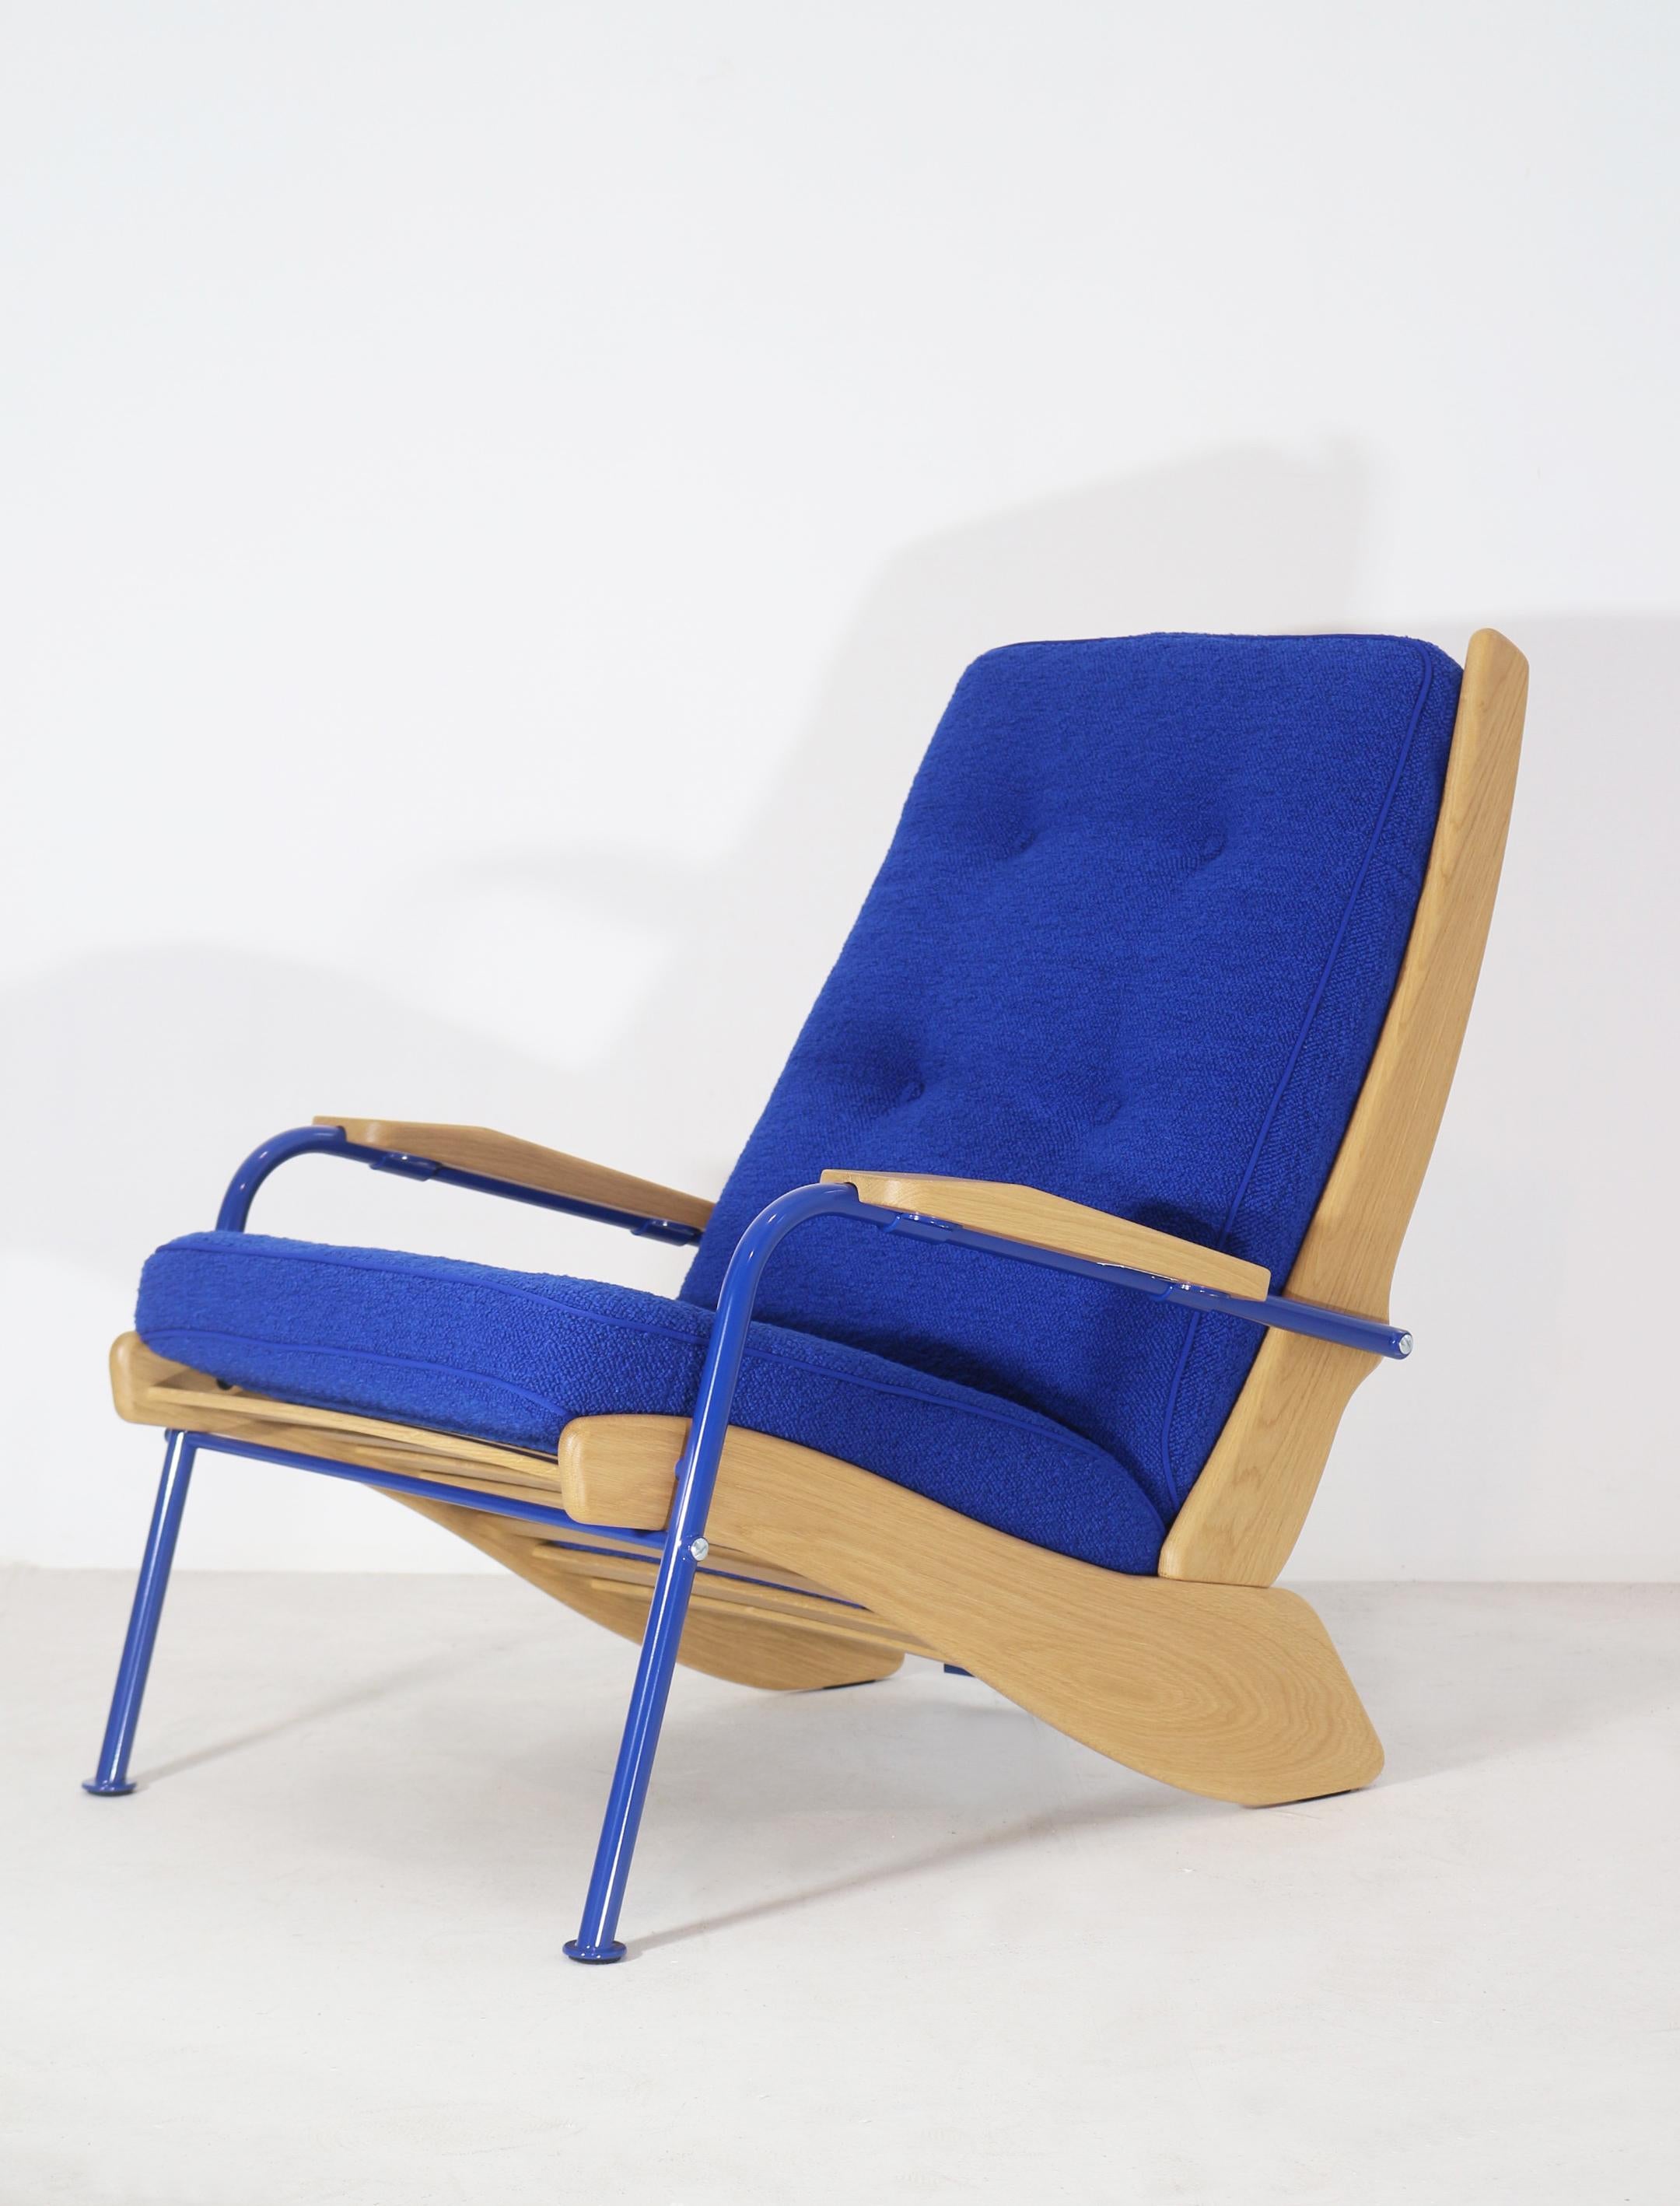 Rare armchair. Model Kangourou designed by jean Prouvé in 1948.
Only 150 units produced by vitra. Limited edition. This one have the number 142. 
It is new. (Never used) with original box and certificate by Vitra.